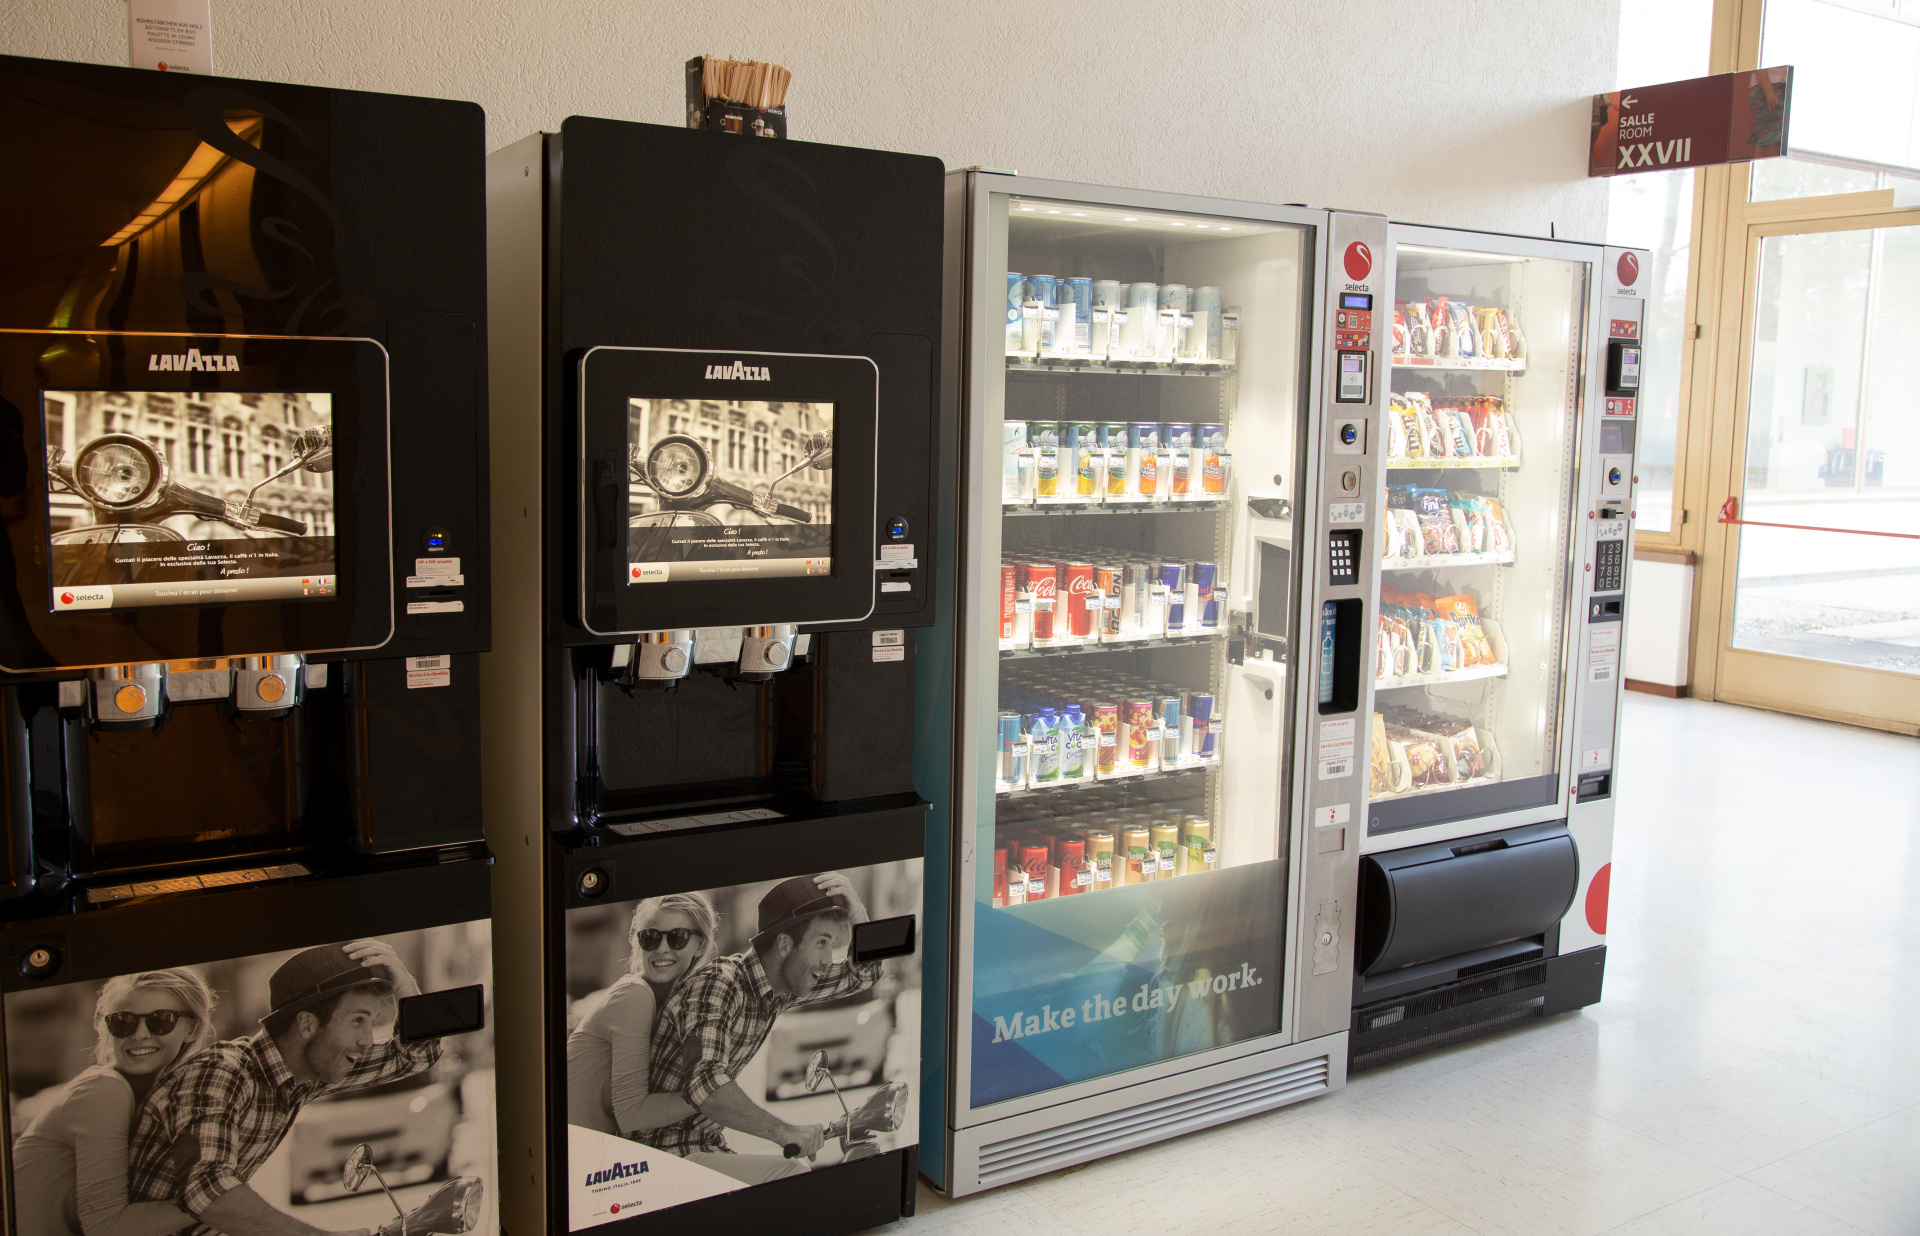 Vending machines for coffee, soft drinks, and snacks in a brightly lit hallway.